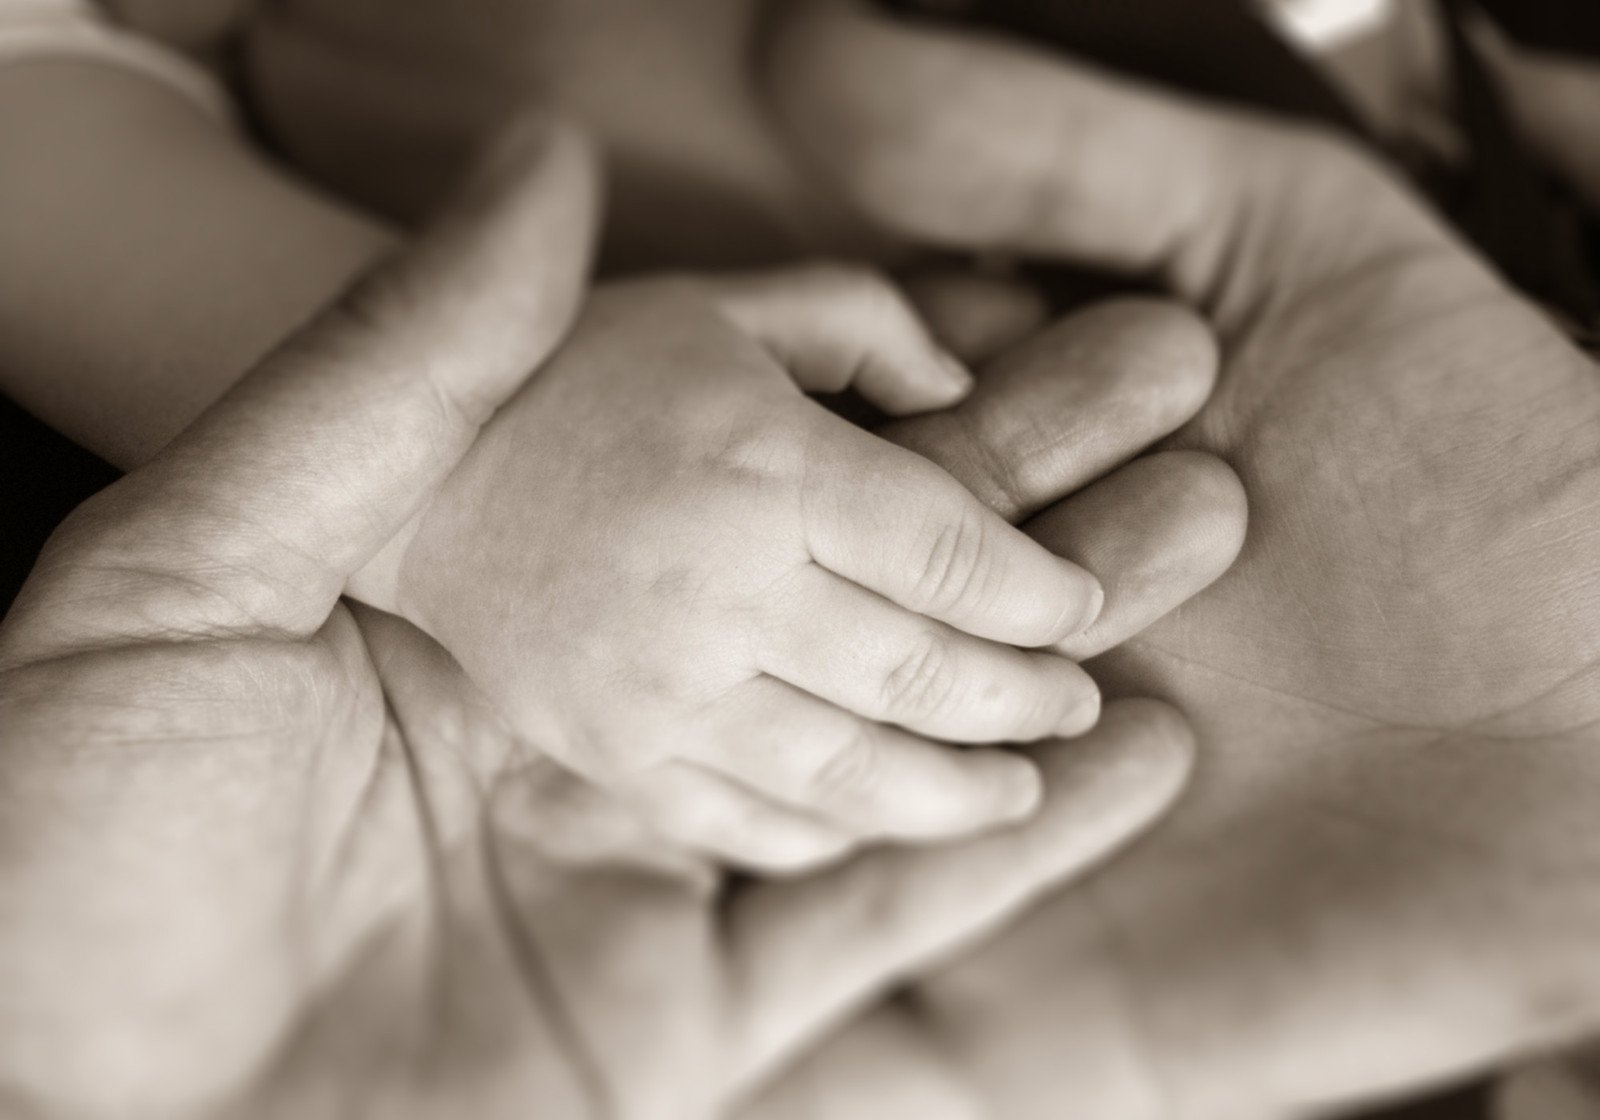 the hands and palms of a baby resting in the mother's arms